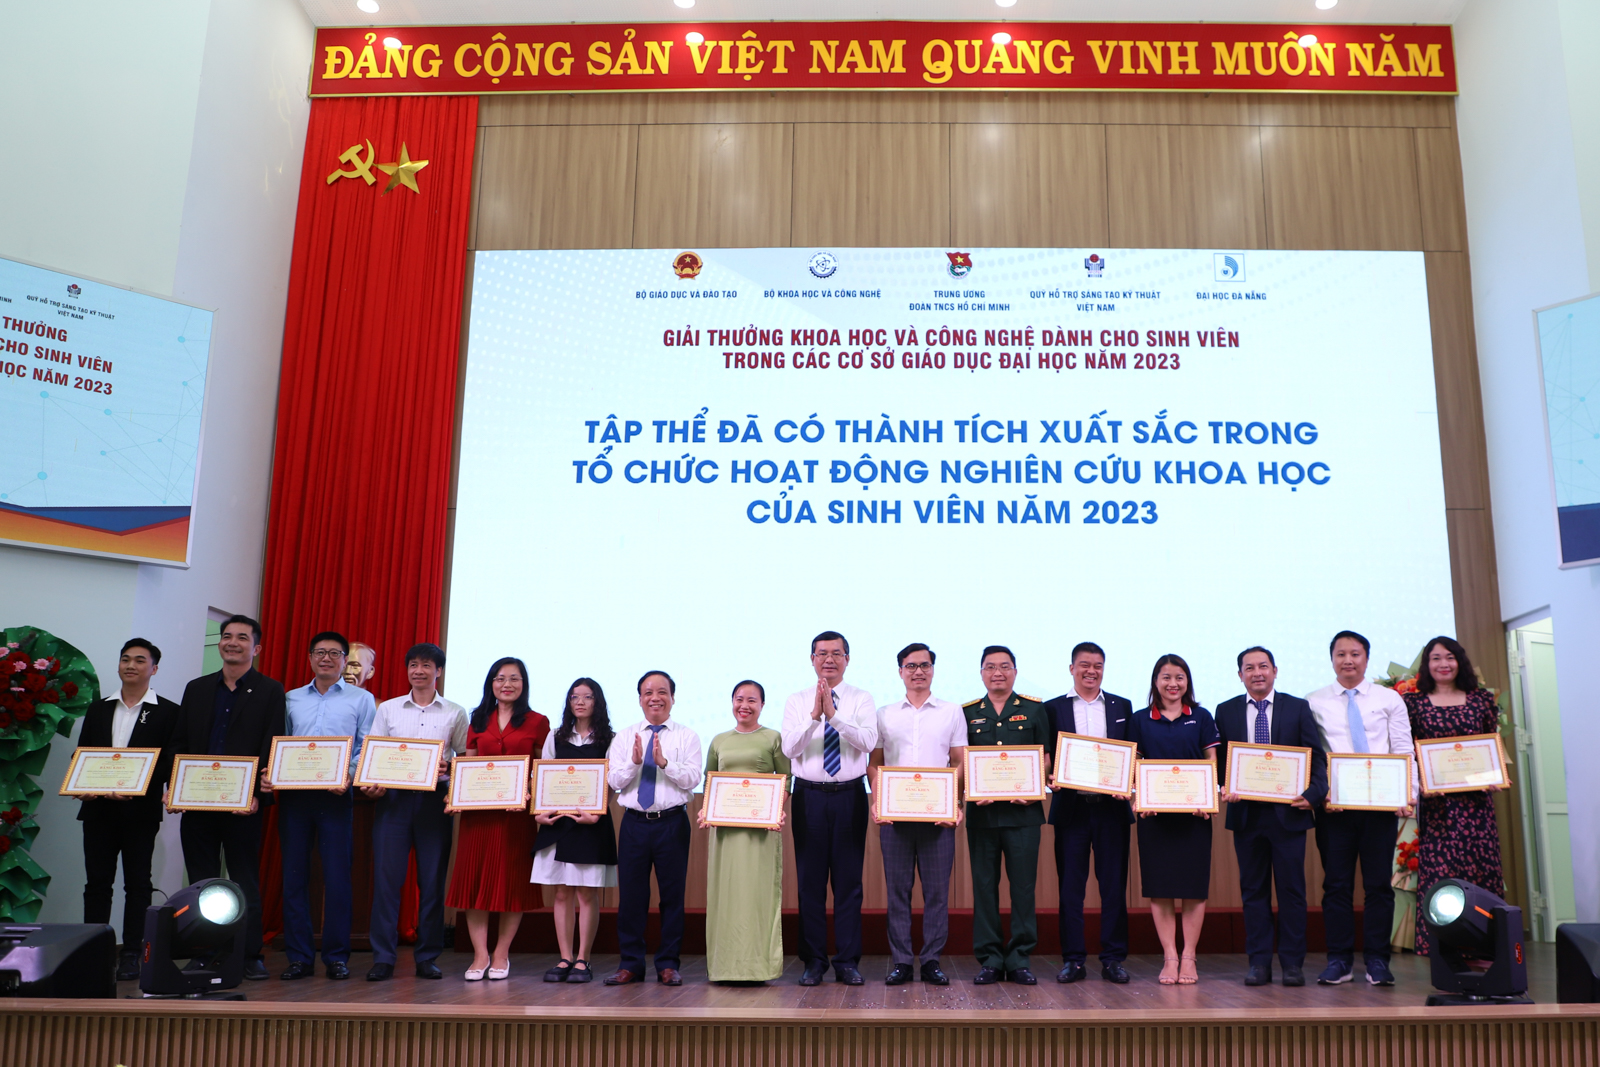 The Ho Chi Minh City University of Industry and Trade achieved 1 First Prize, 1 Second Prize, 2 Third Prizes, and 5 Consolation Prizes at the National Science and Technology Awards for University Stud